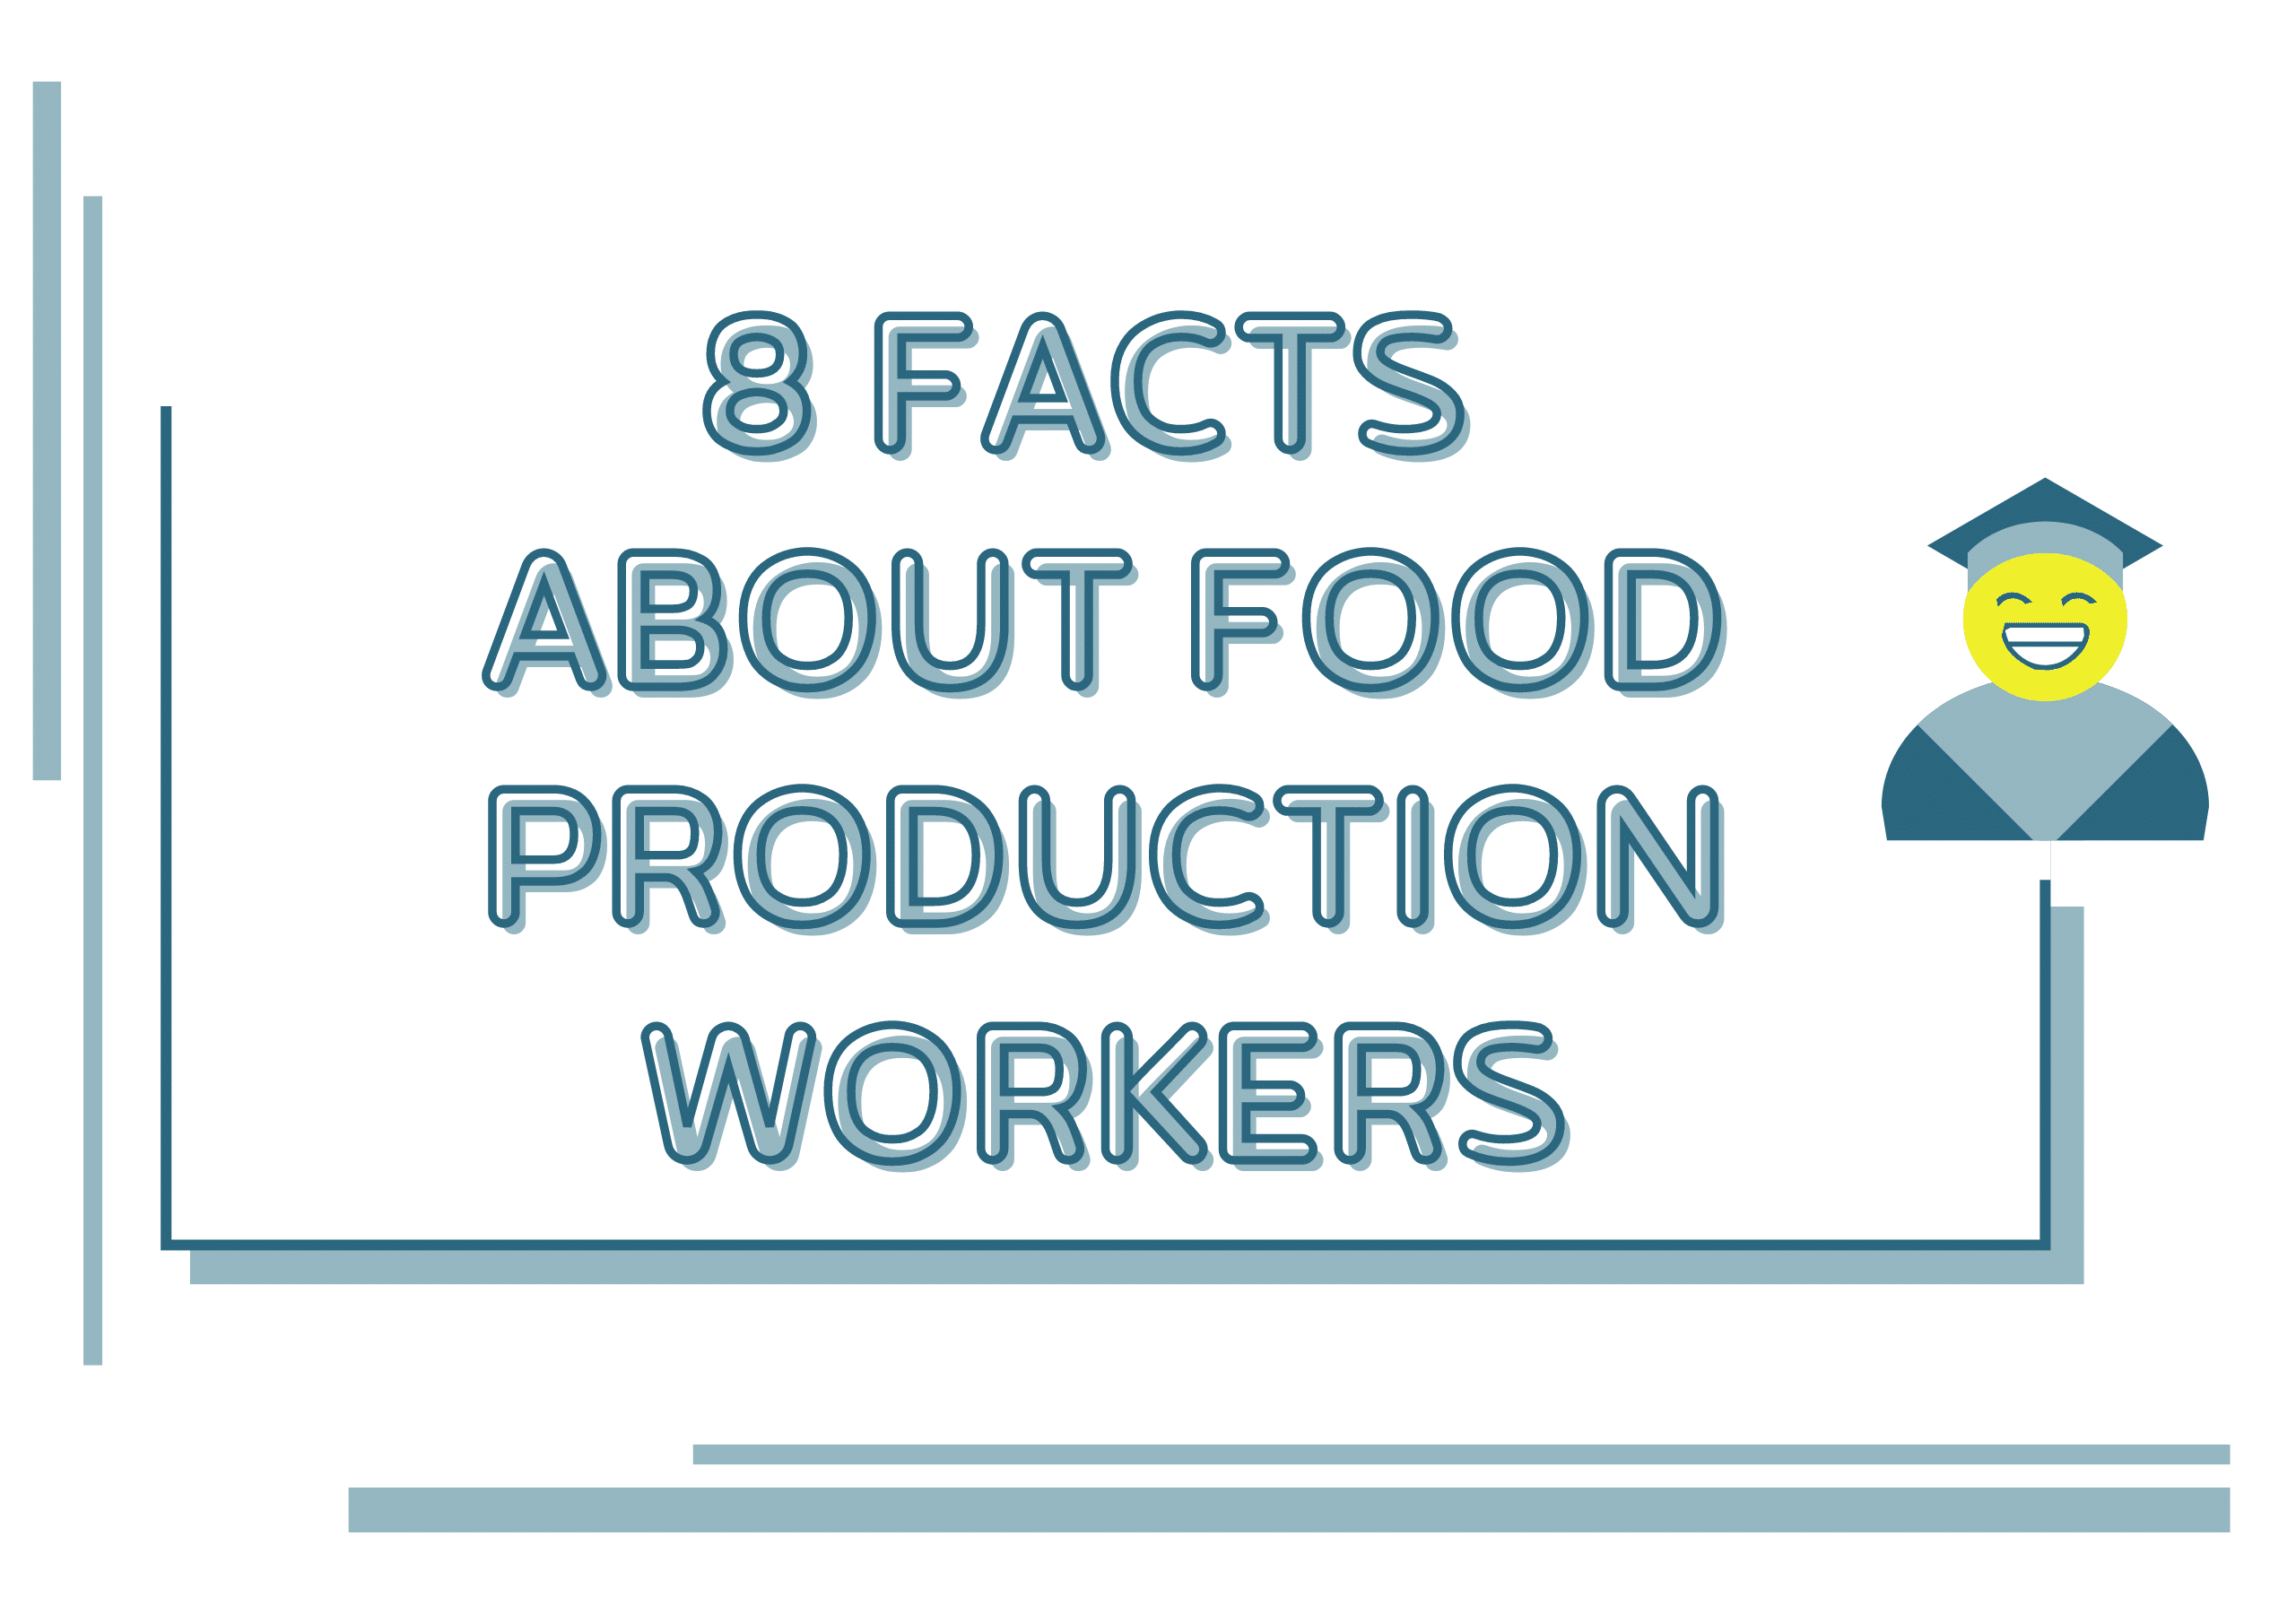 An infographic titled '8 Facts About Food Production Workers' featuring a smiling face with a graduation cap icon